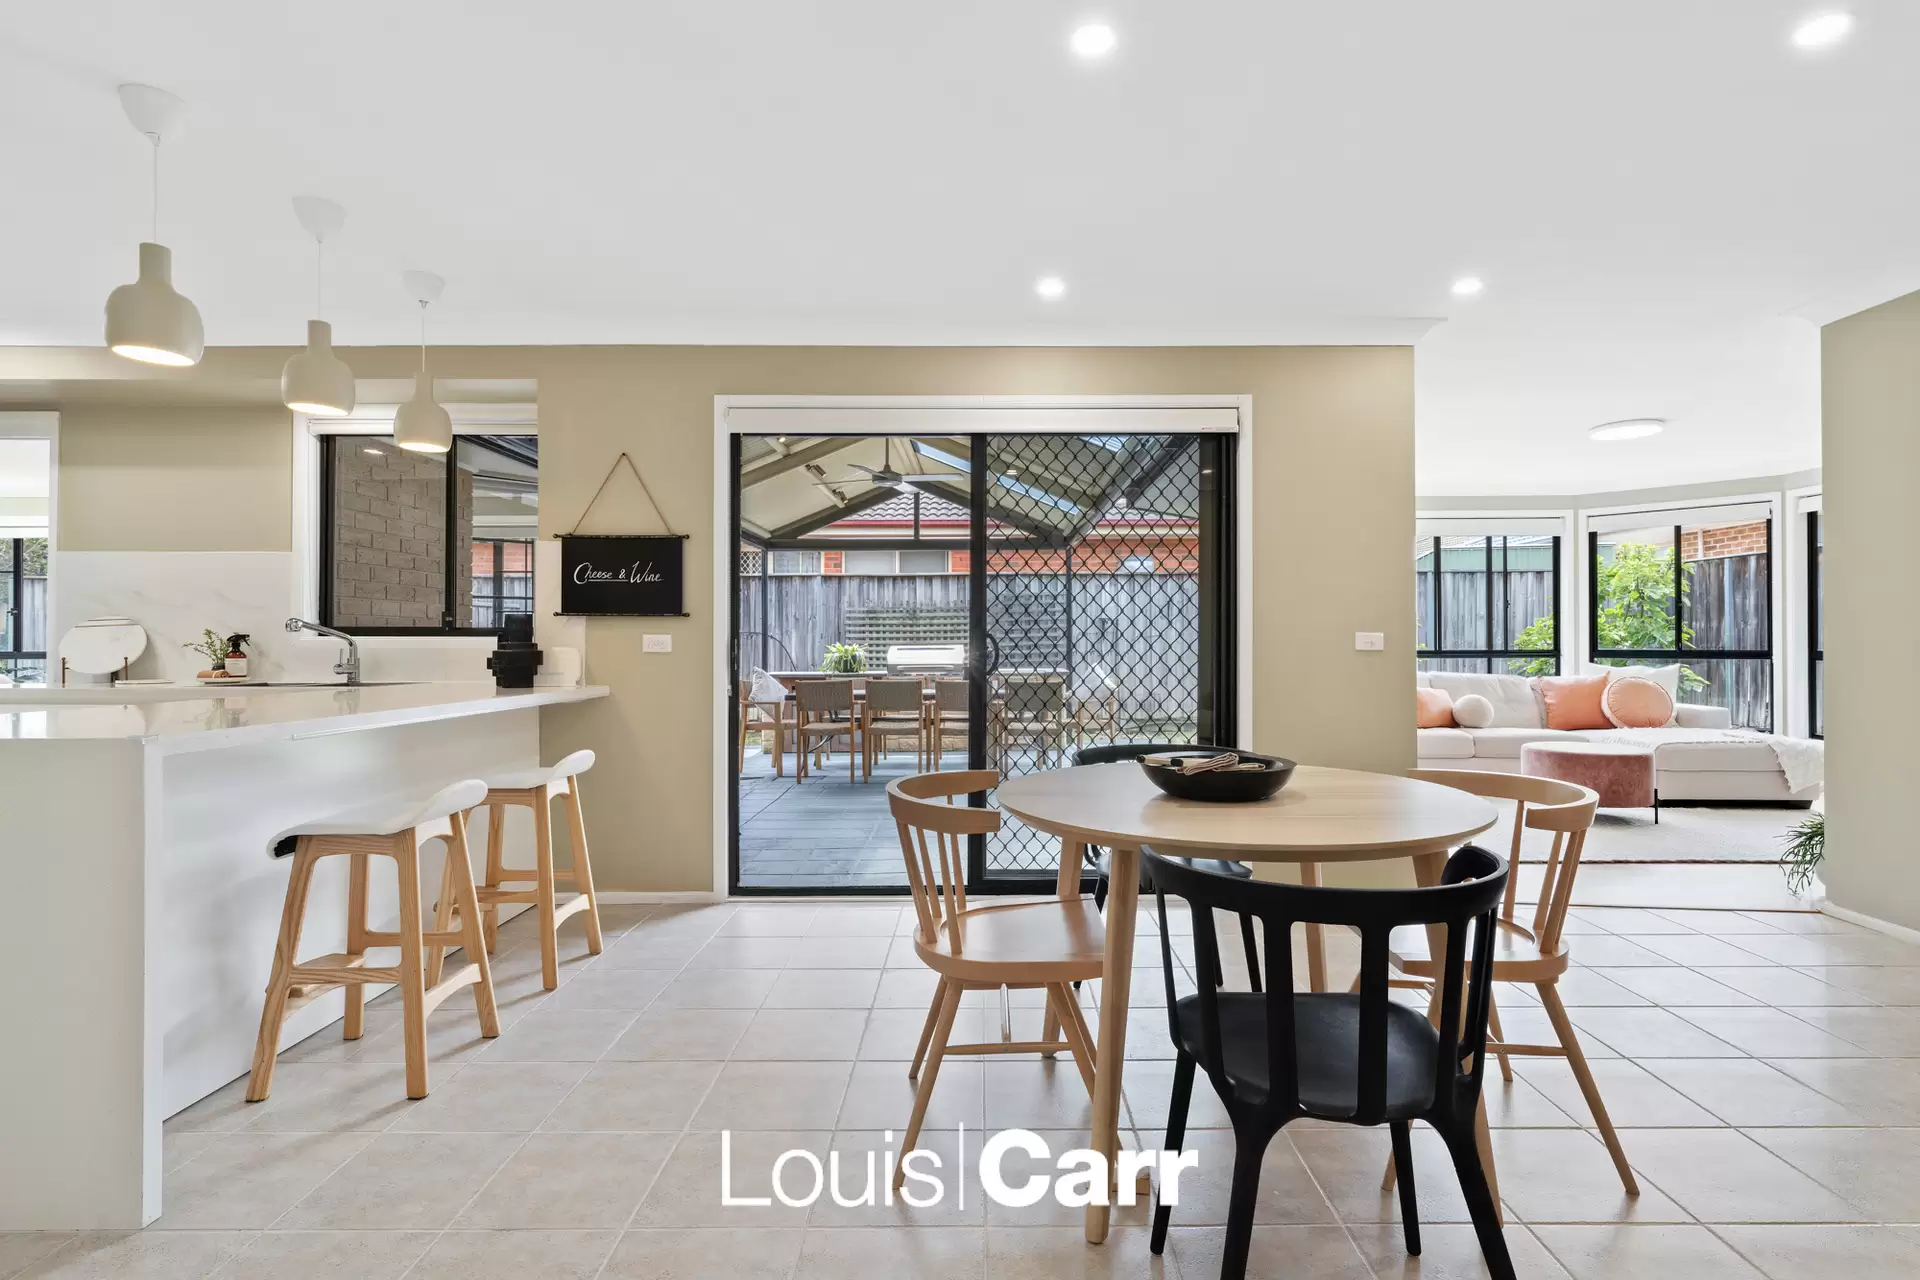 Photo #11: 33 Marsden Avenue, Kellyville - For Sale by Louis Carr Real Estate